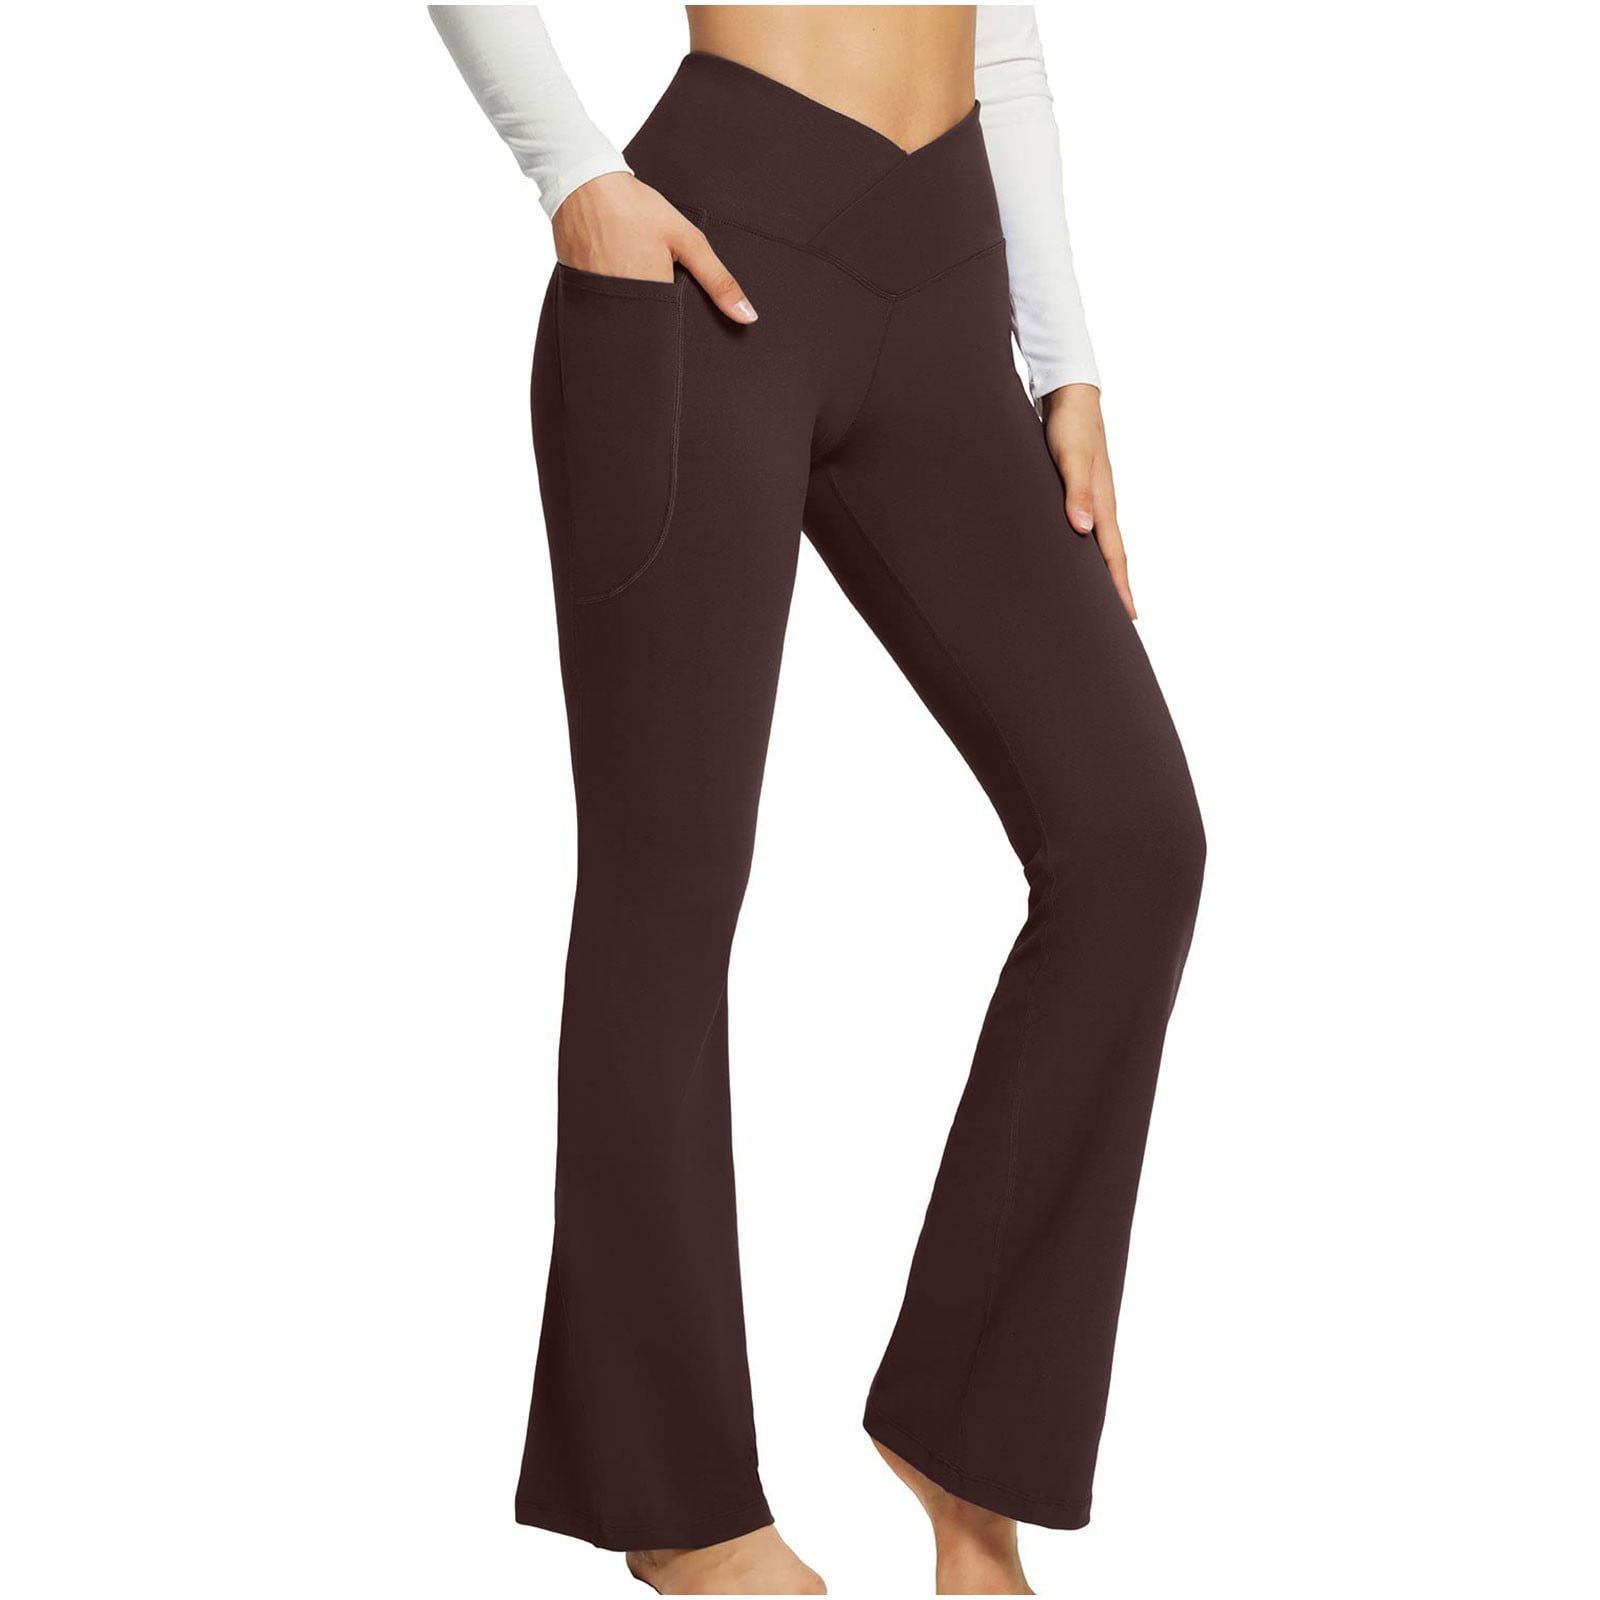 Lu Womens Flare Running Leggings With Pockets Designer Pants For Yoga,  Running, And Fitness High Rise, Pocket Sized, Loose Fit Gym Wear For Indoor  And Outdoor Workouts From Baihuifeng, $35.06